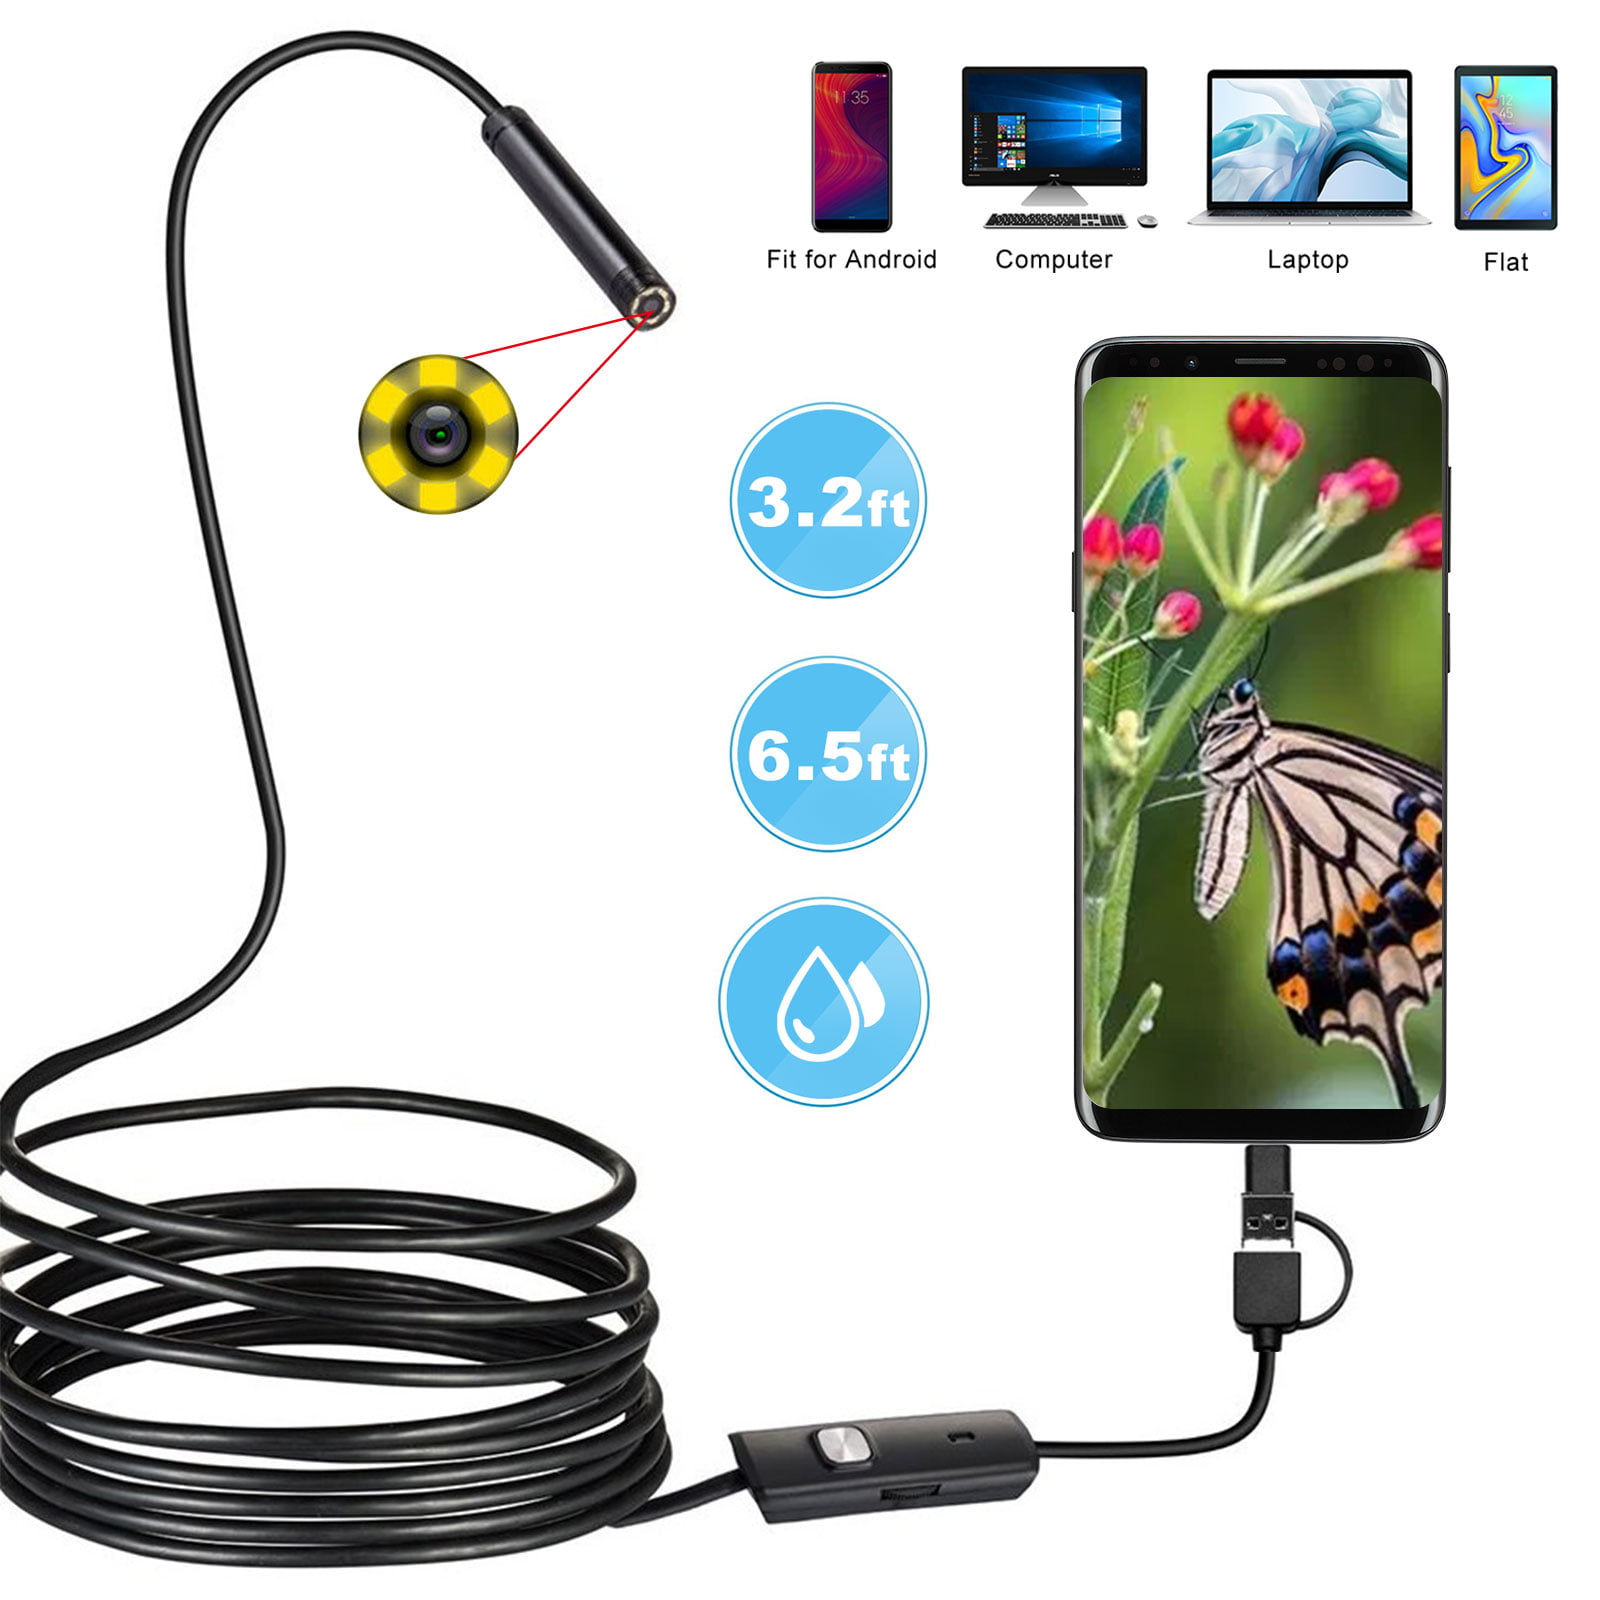 5m line USB Endoscope semi-Rigid borescope Inspection Camera HD Micro USB C-Type Pipe Camera Waterproof IP67 5.5mm Suitable for PC Android Smartphone Tablet with OTG and UVC 